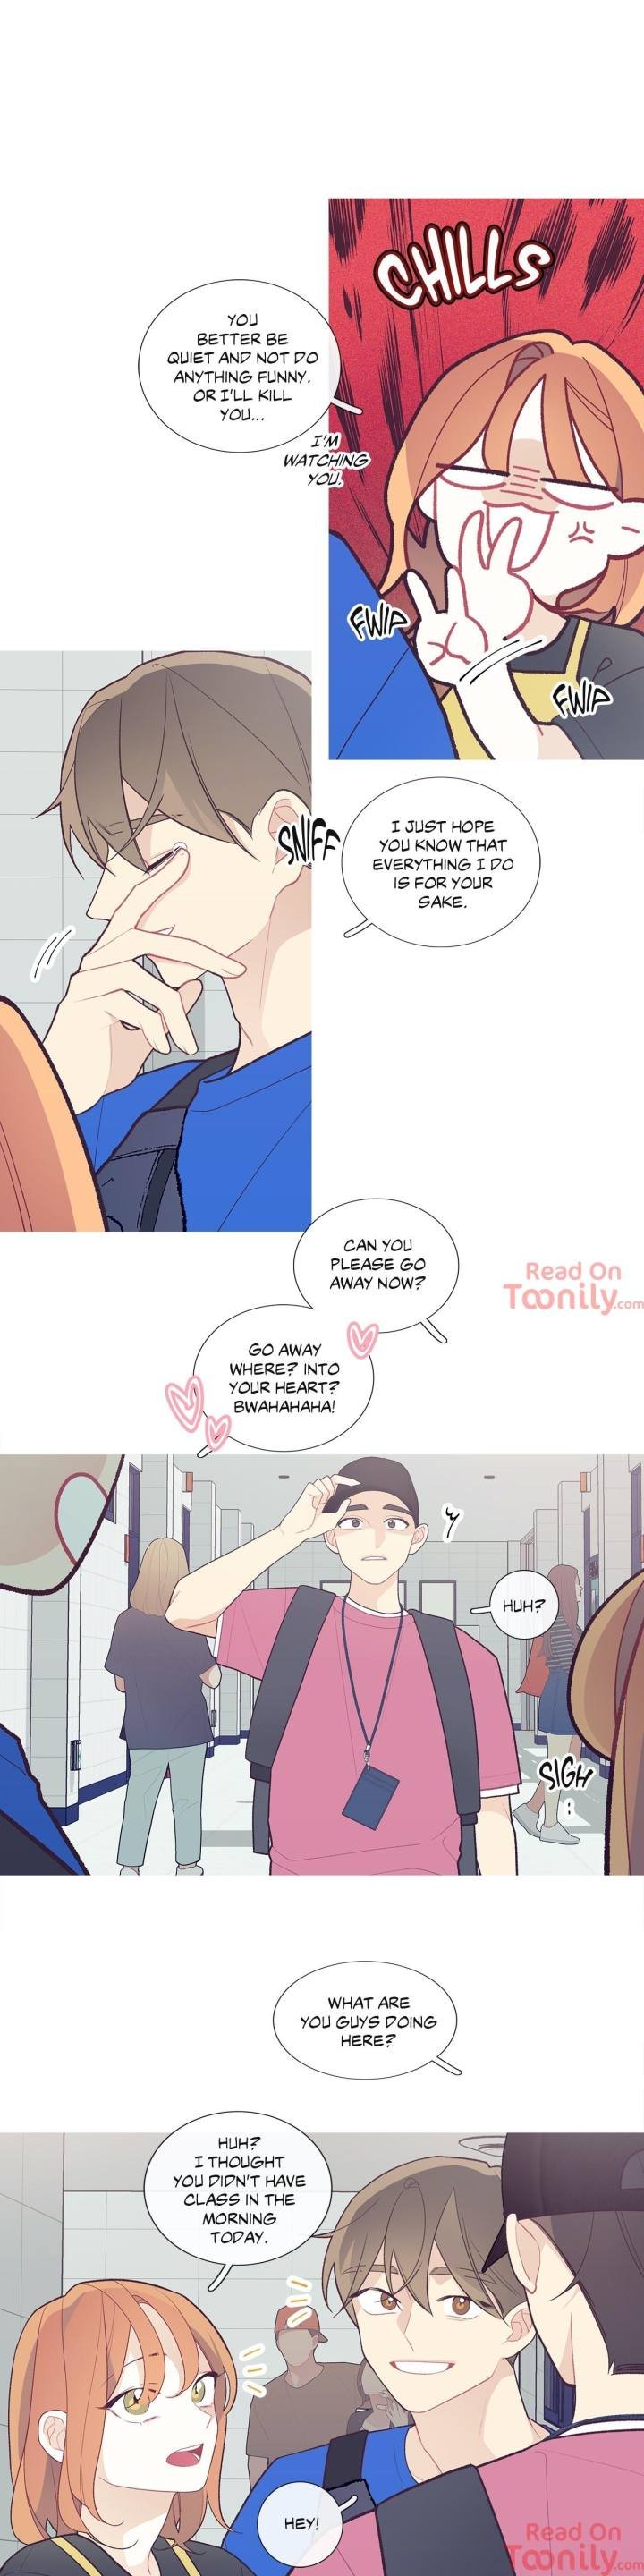 whats-going-on-chap-47-1